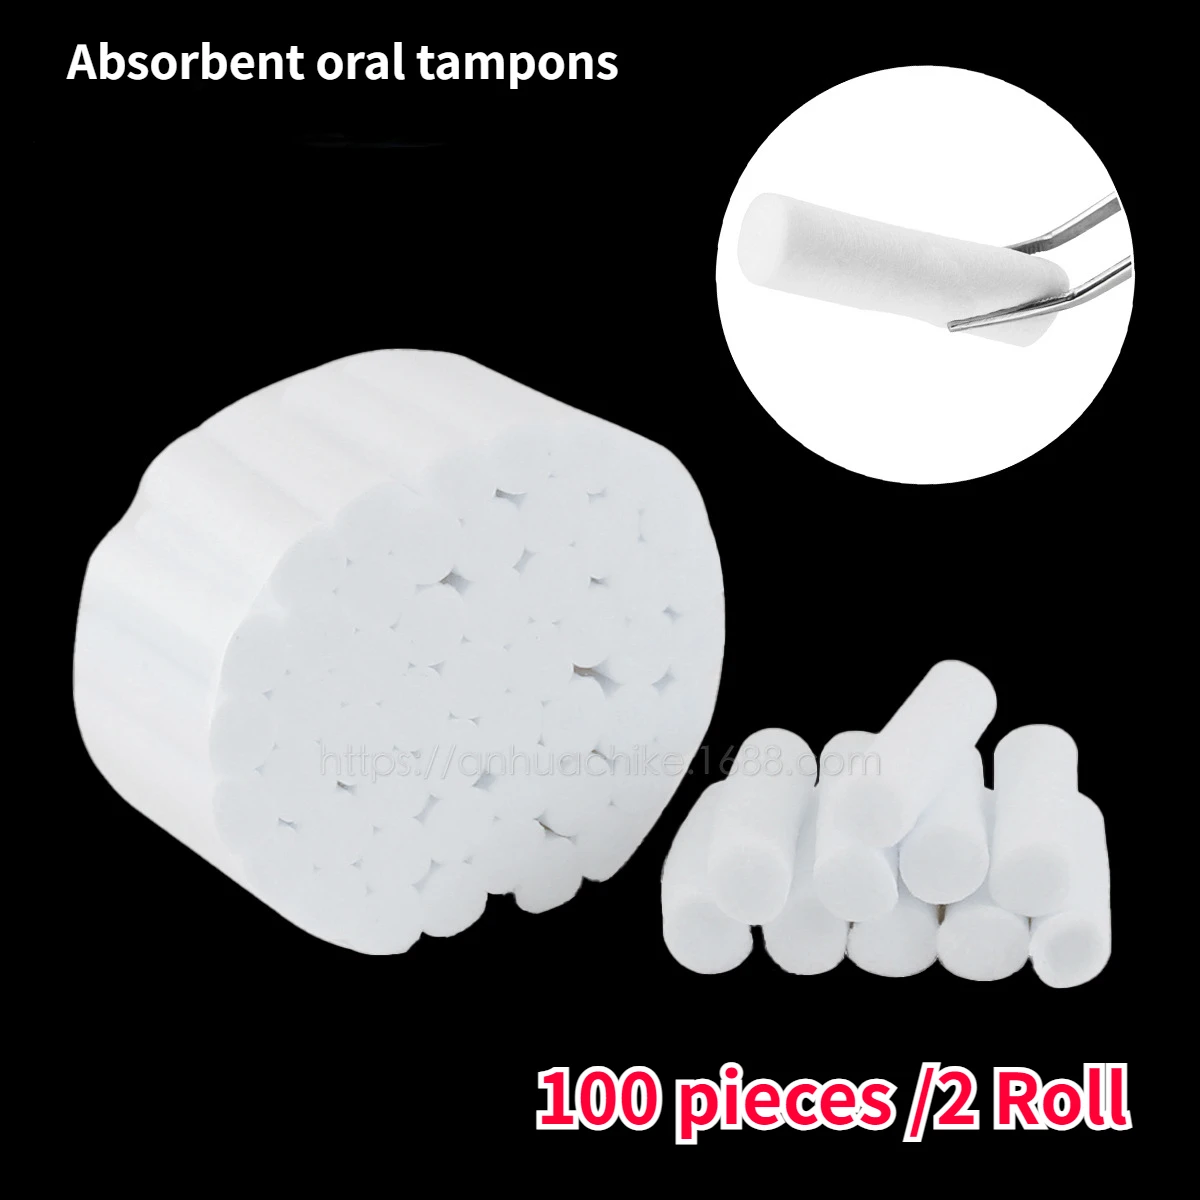 

100PCs Dental Hemostatic Cotton High Absorbent Nonfat Cottons Roll Medical Surgical Dentistry Tampons Moisture Proof Oral Tools